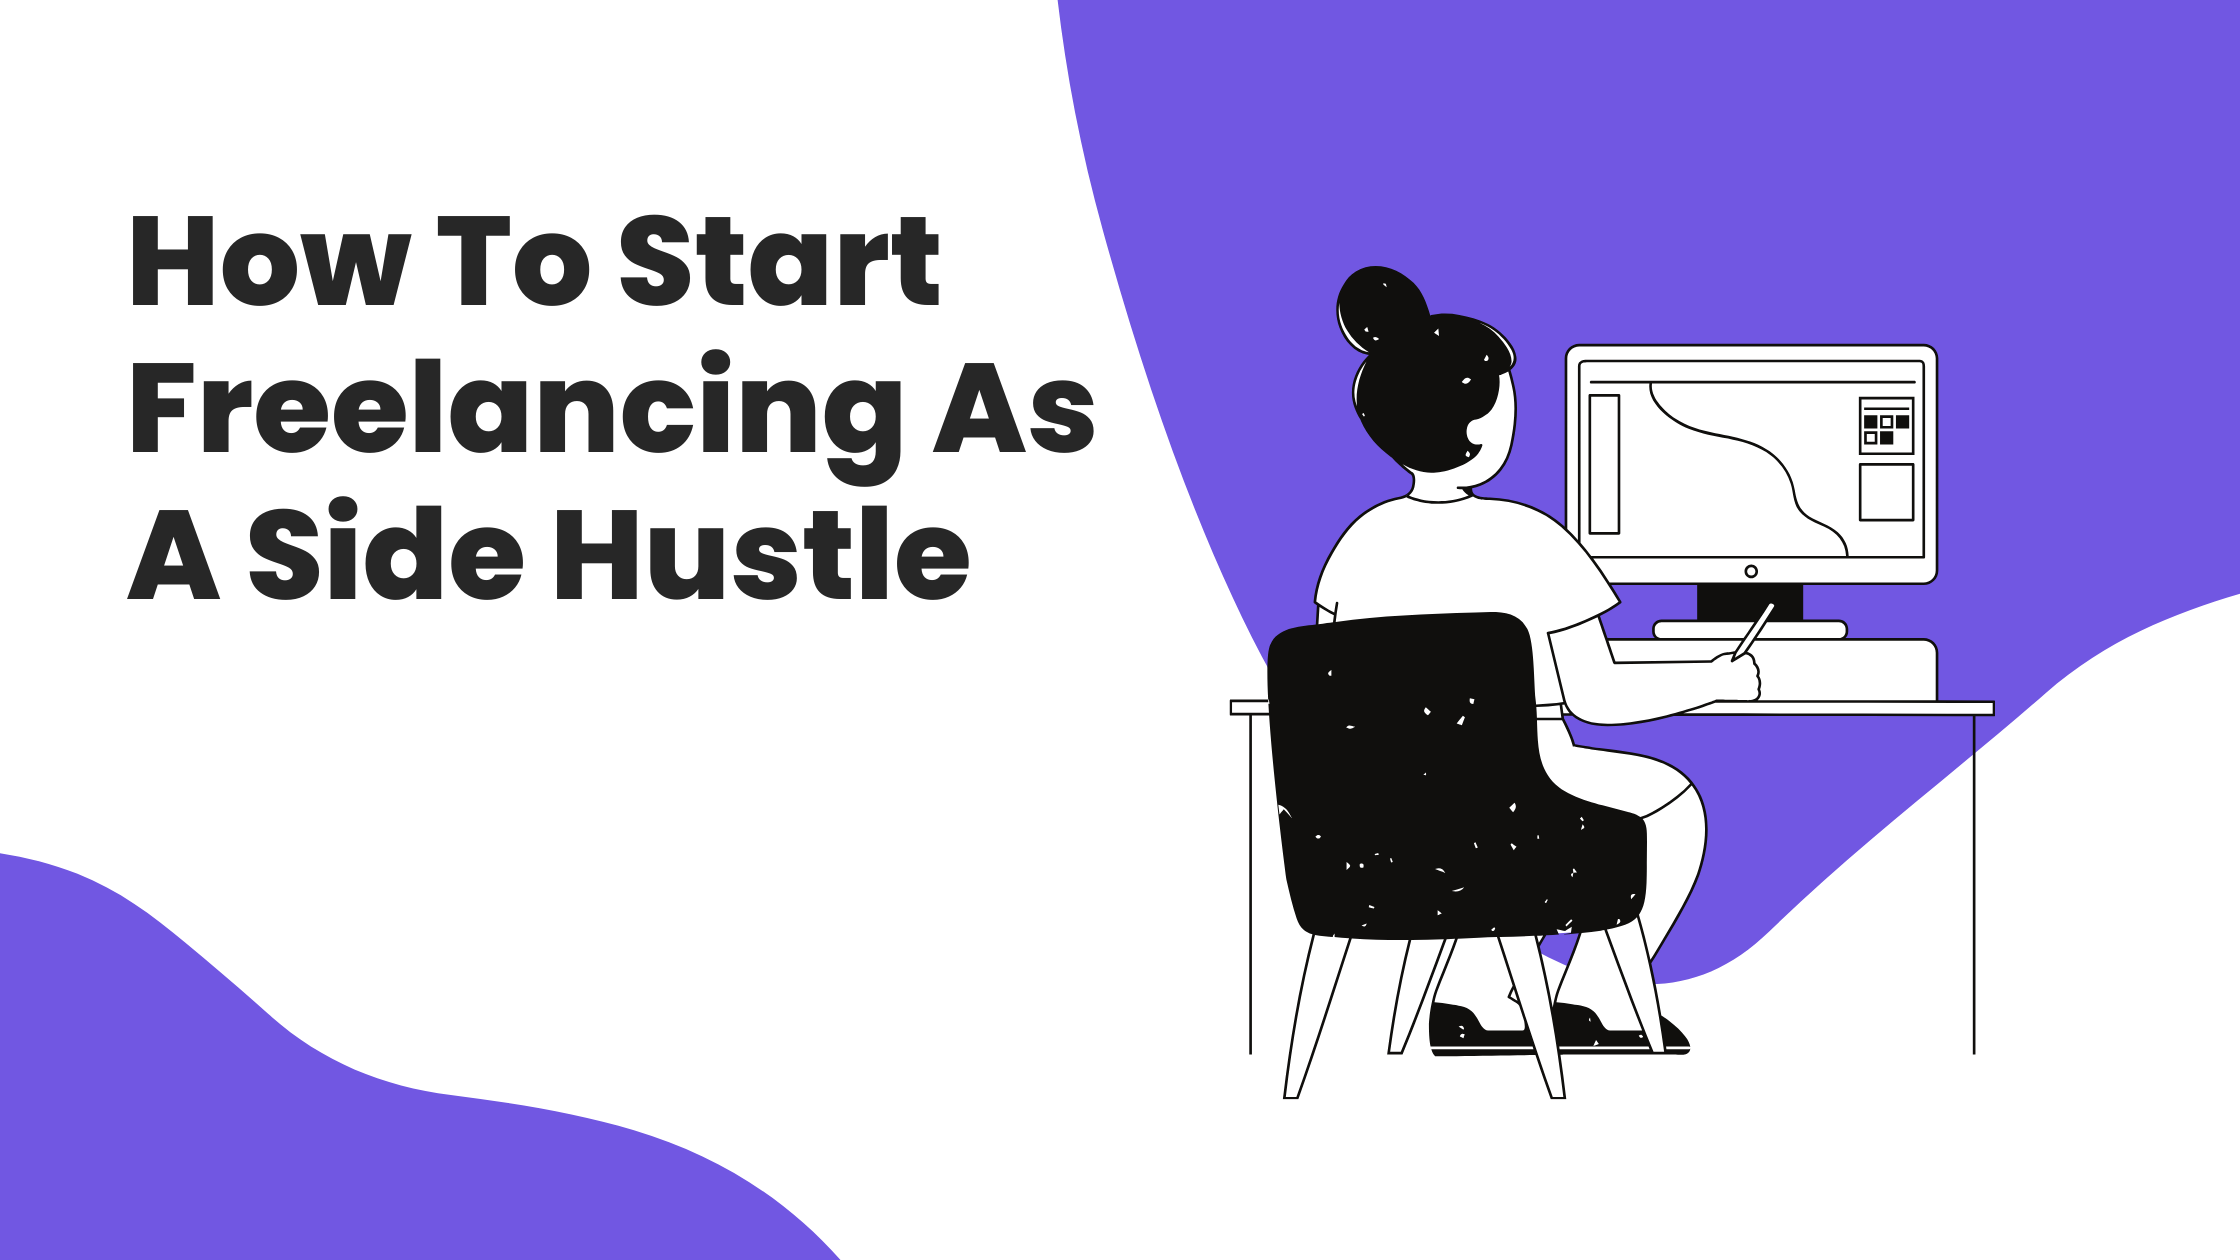 How To Start Freelancing As A Side Hustle